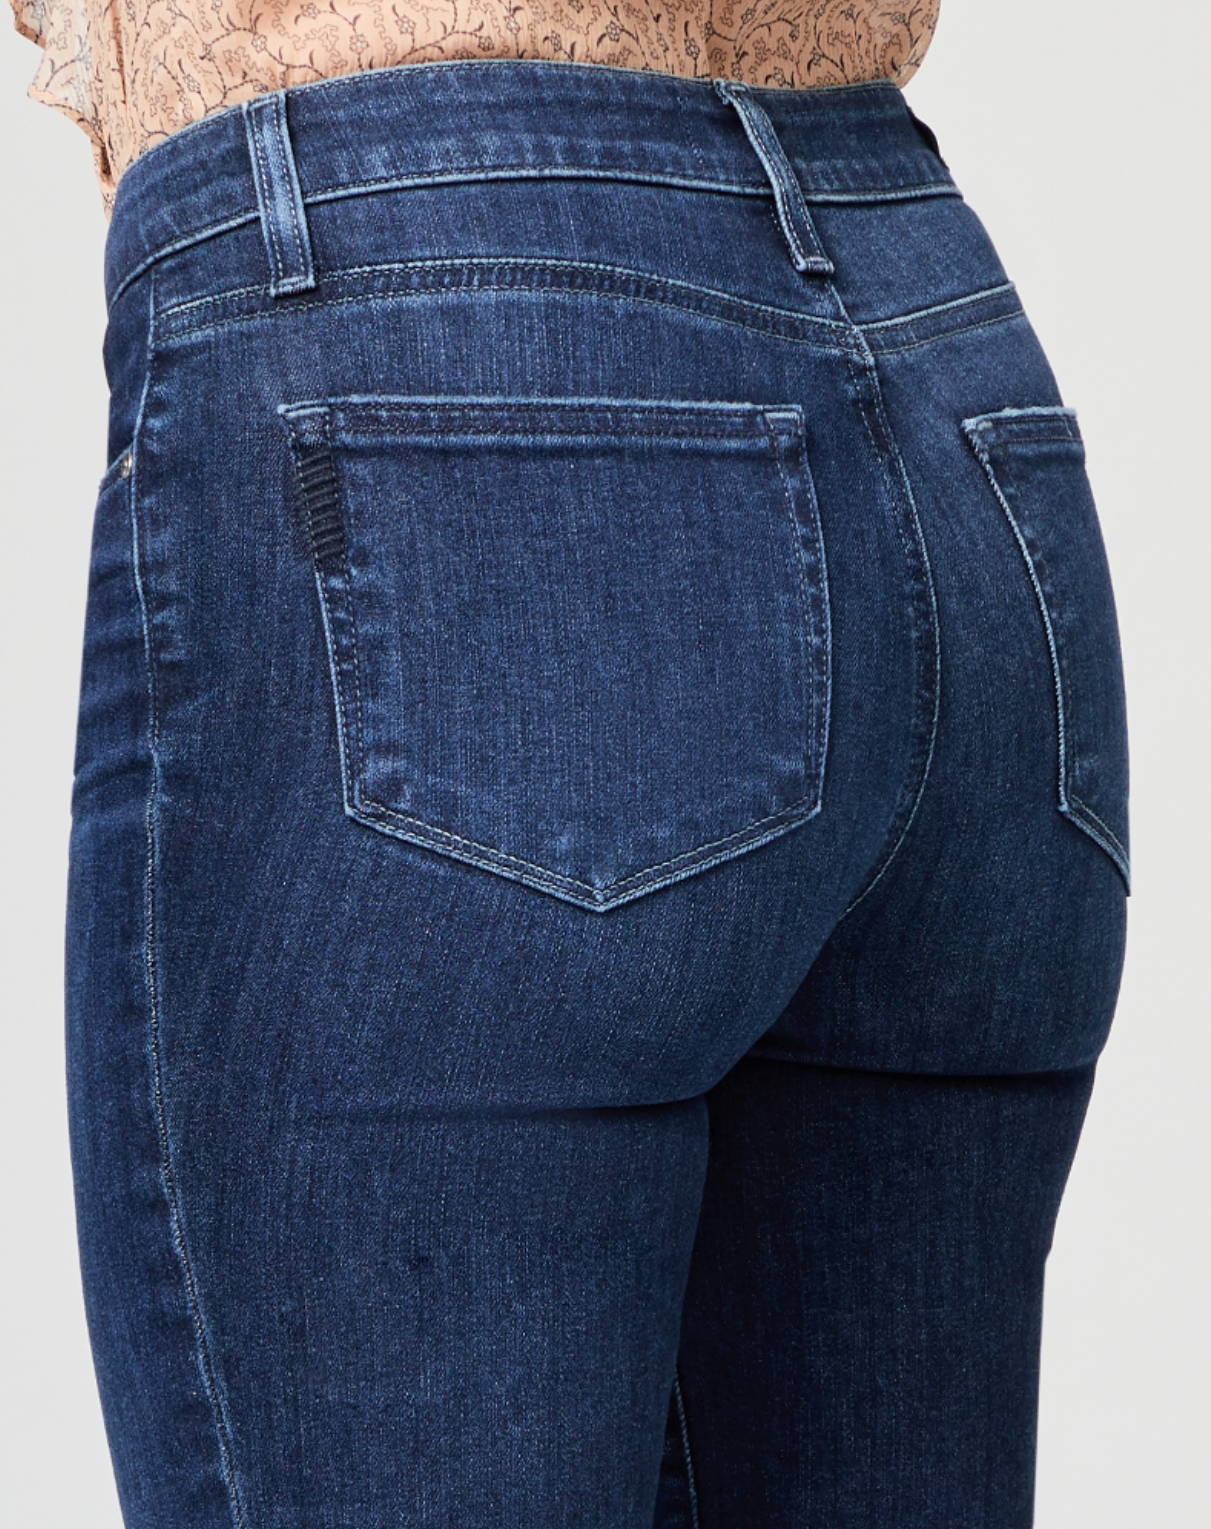 close of view of the rear pocket detail on the hoxton high rise straight jean from paige in monarch blue